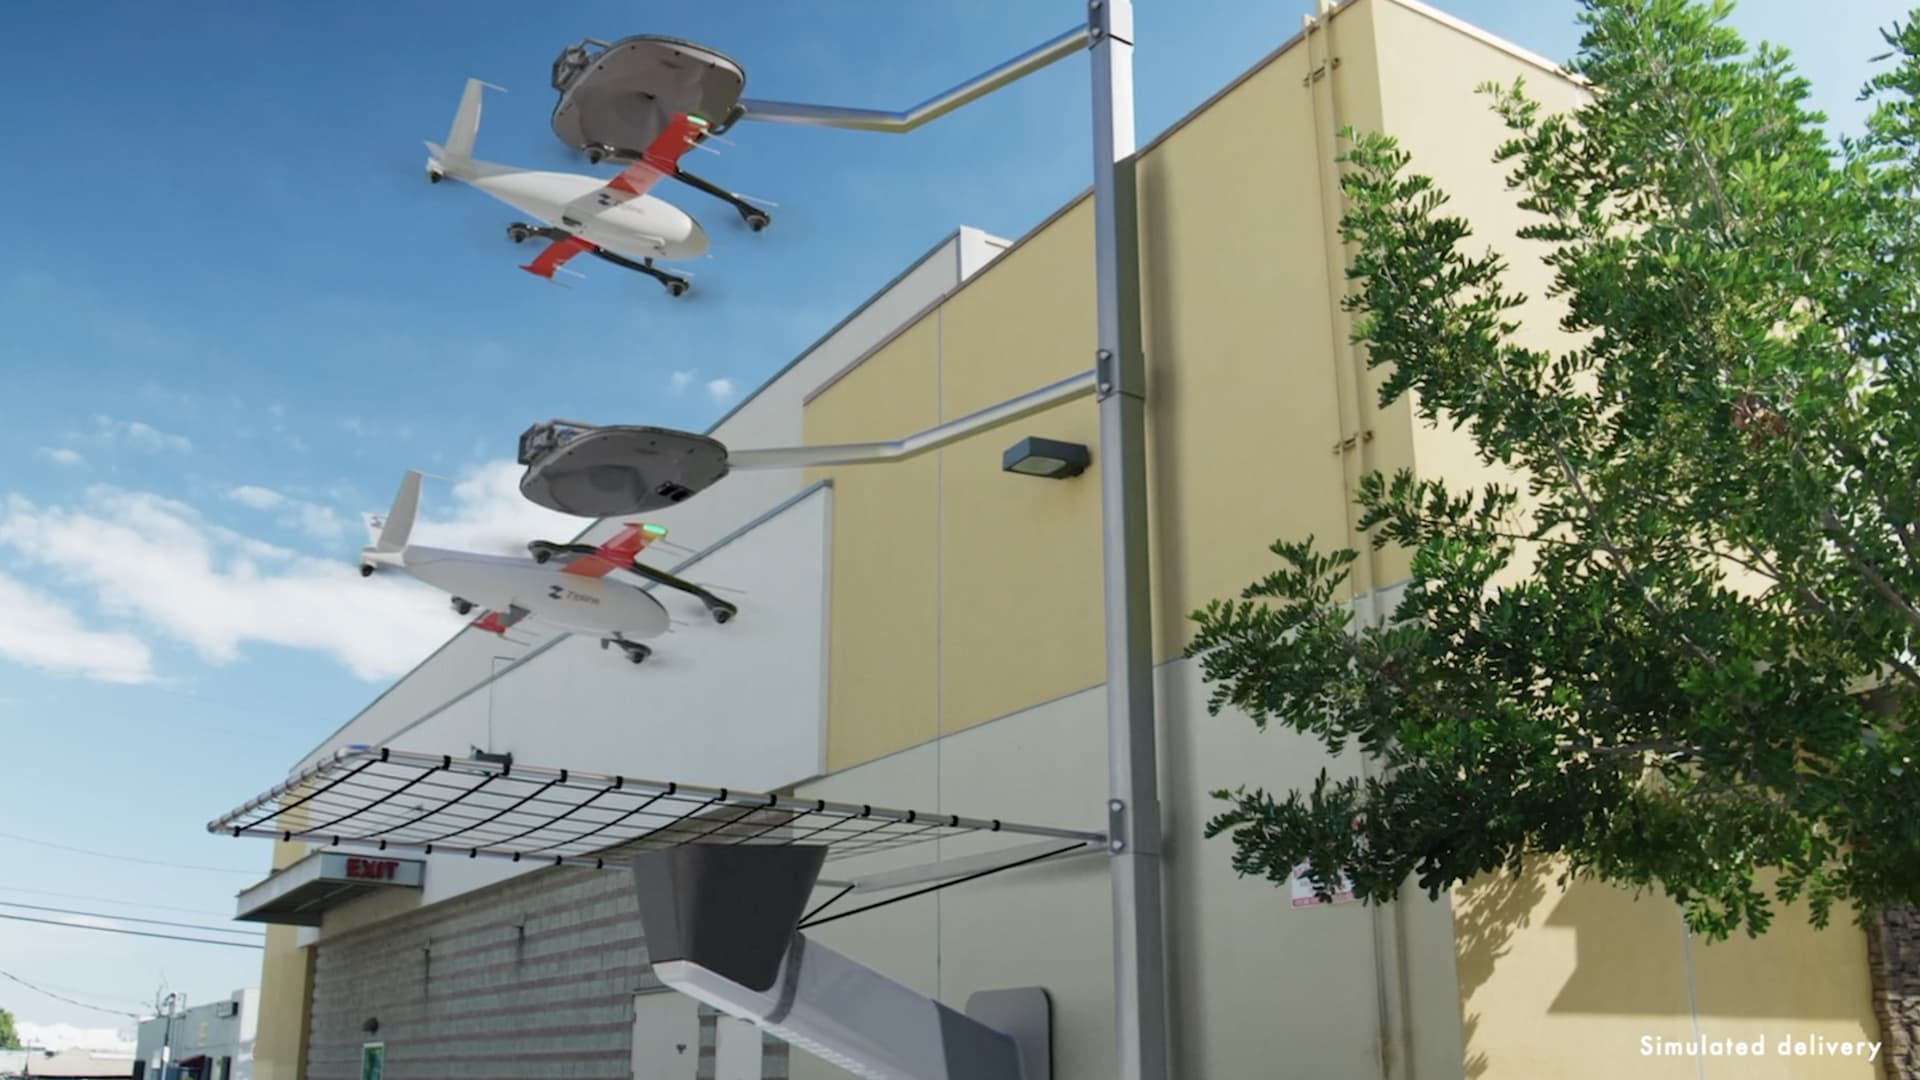 In flurry of FAA approvals, drones are about to fly far over US skies